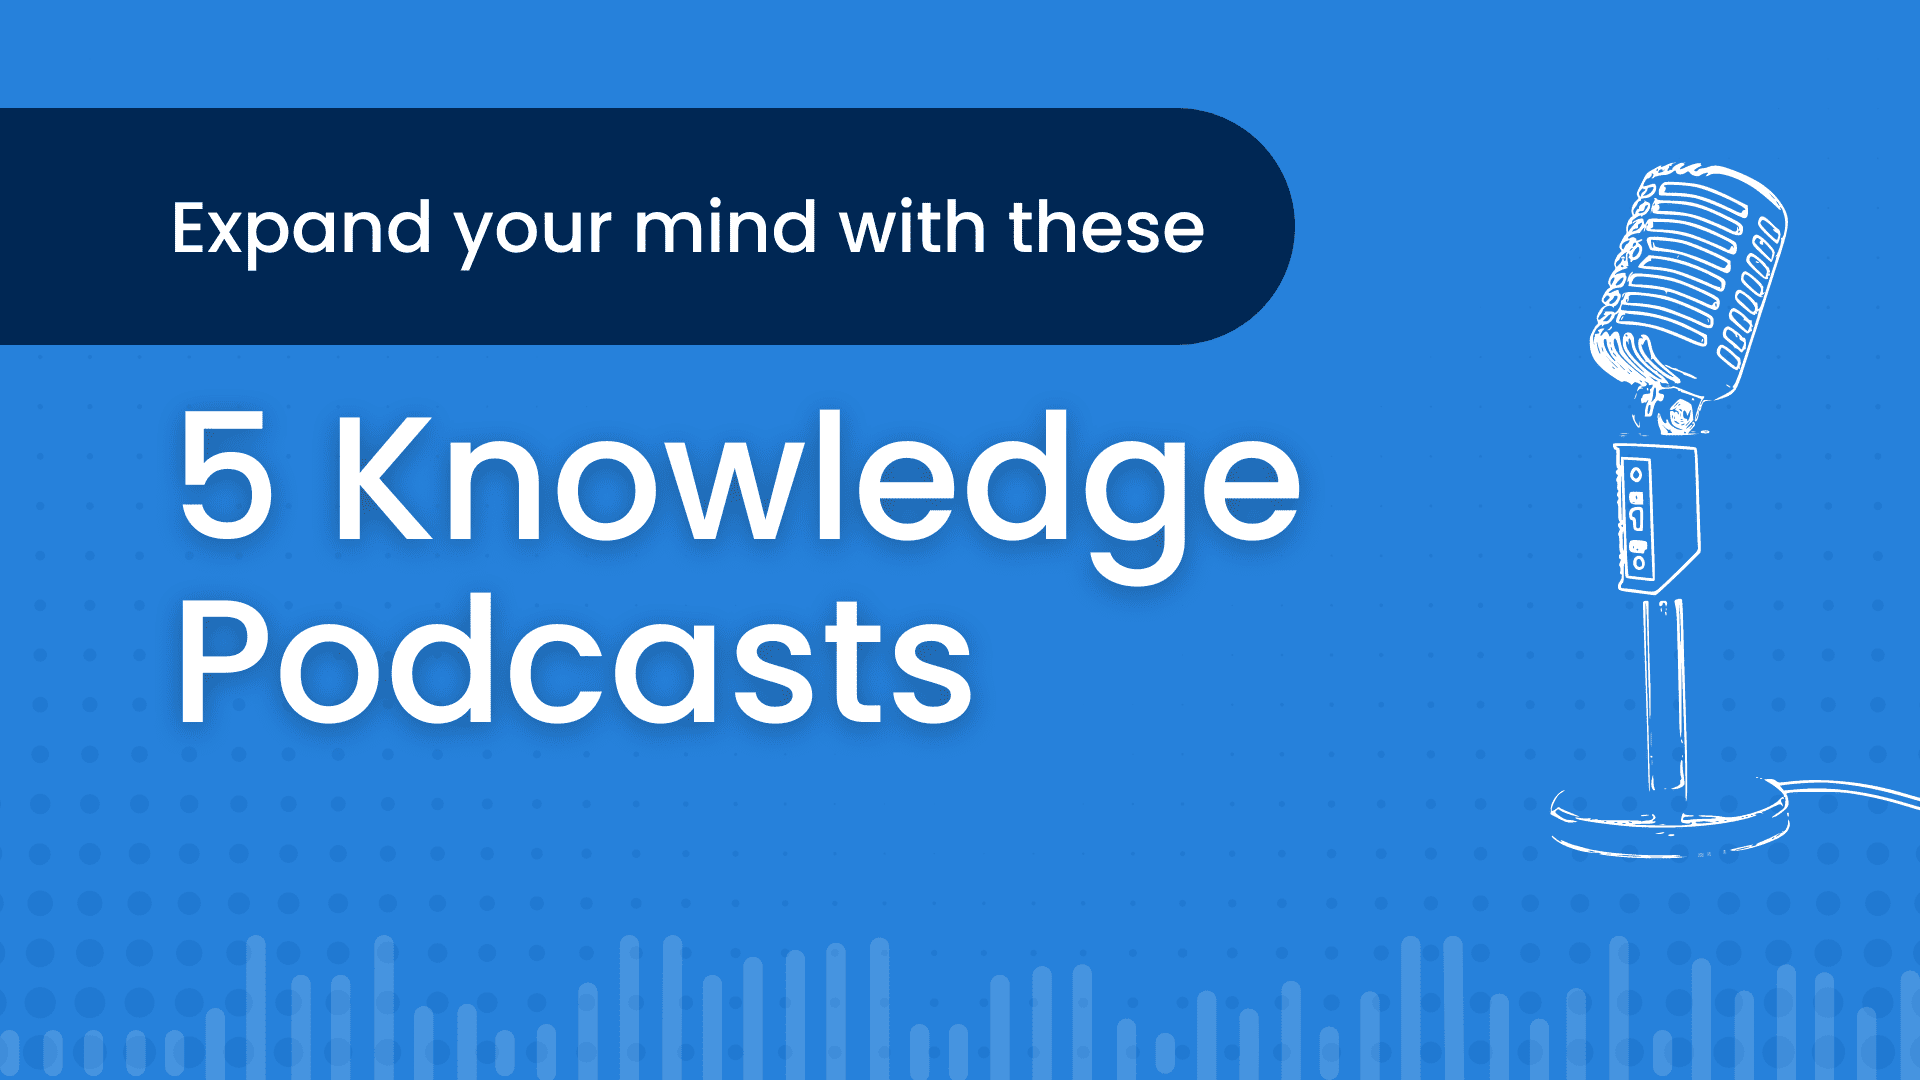 5 knowledge podcasts